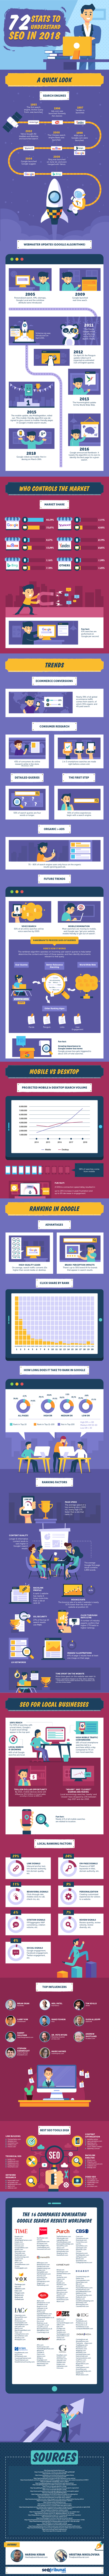 72 Stats to Understand SEO in 2018 infographic